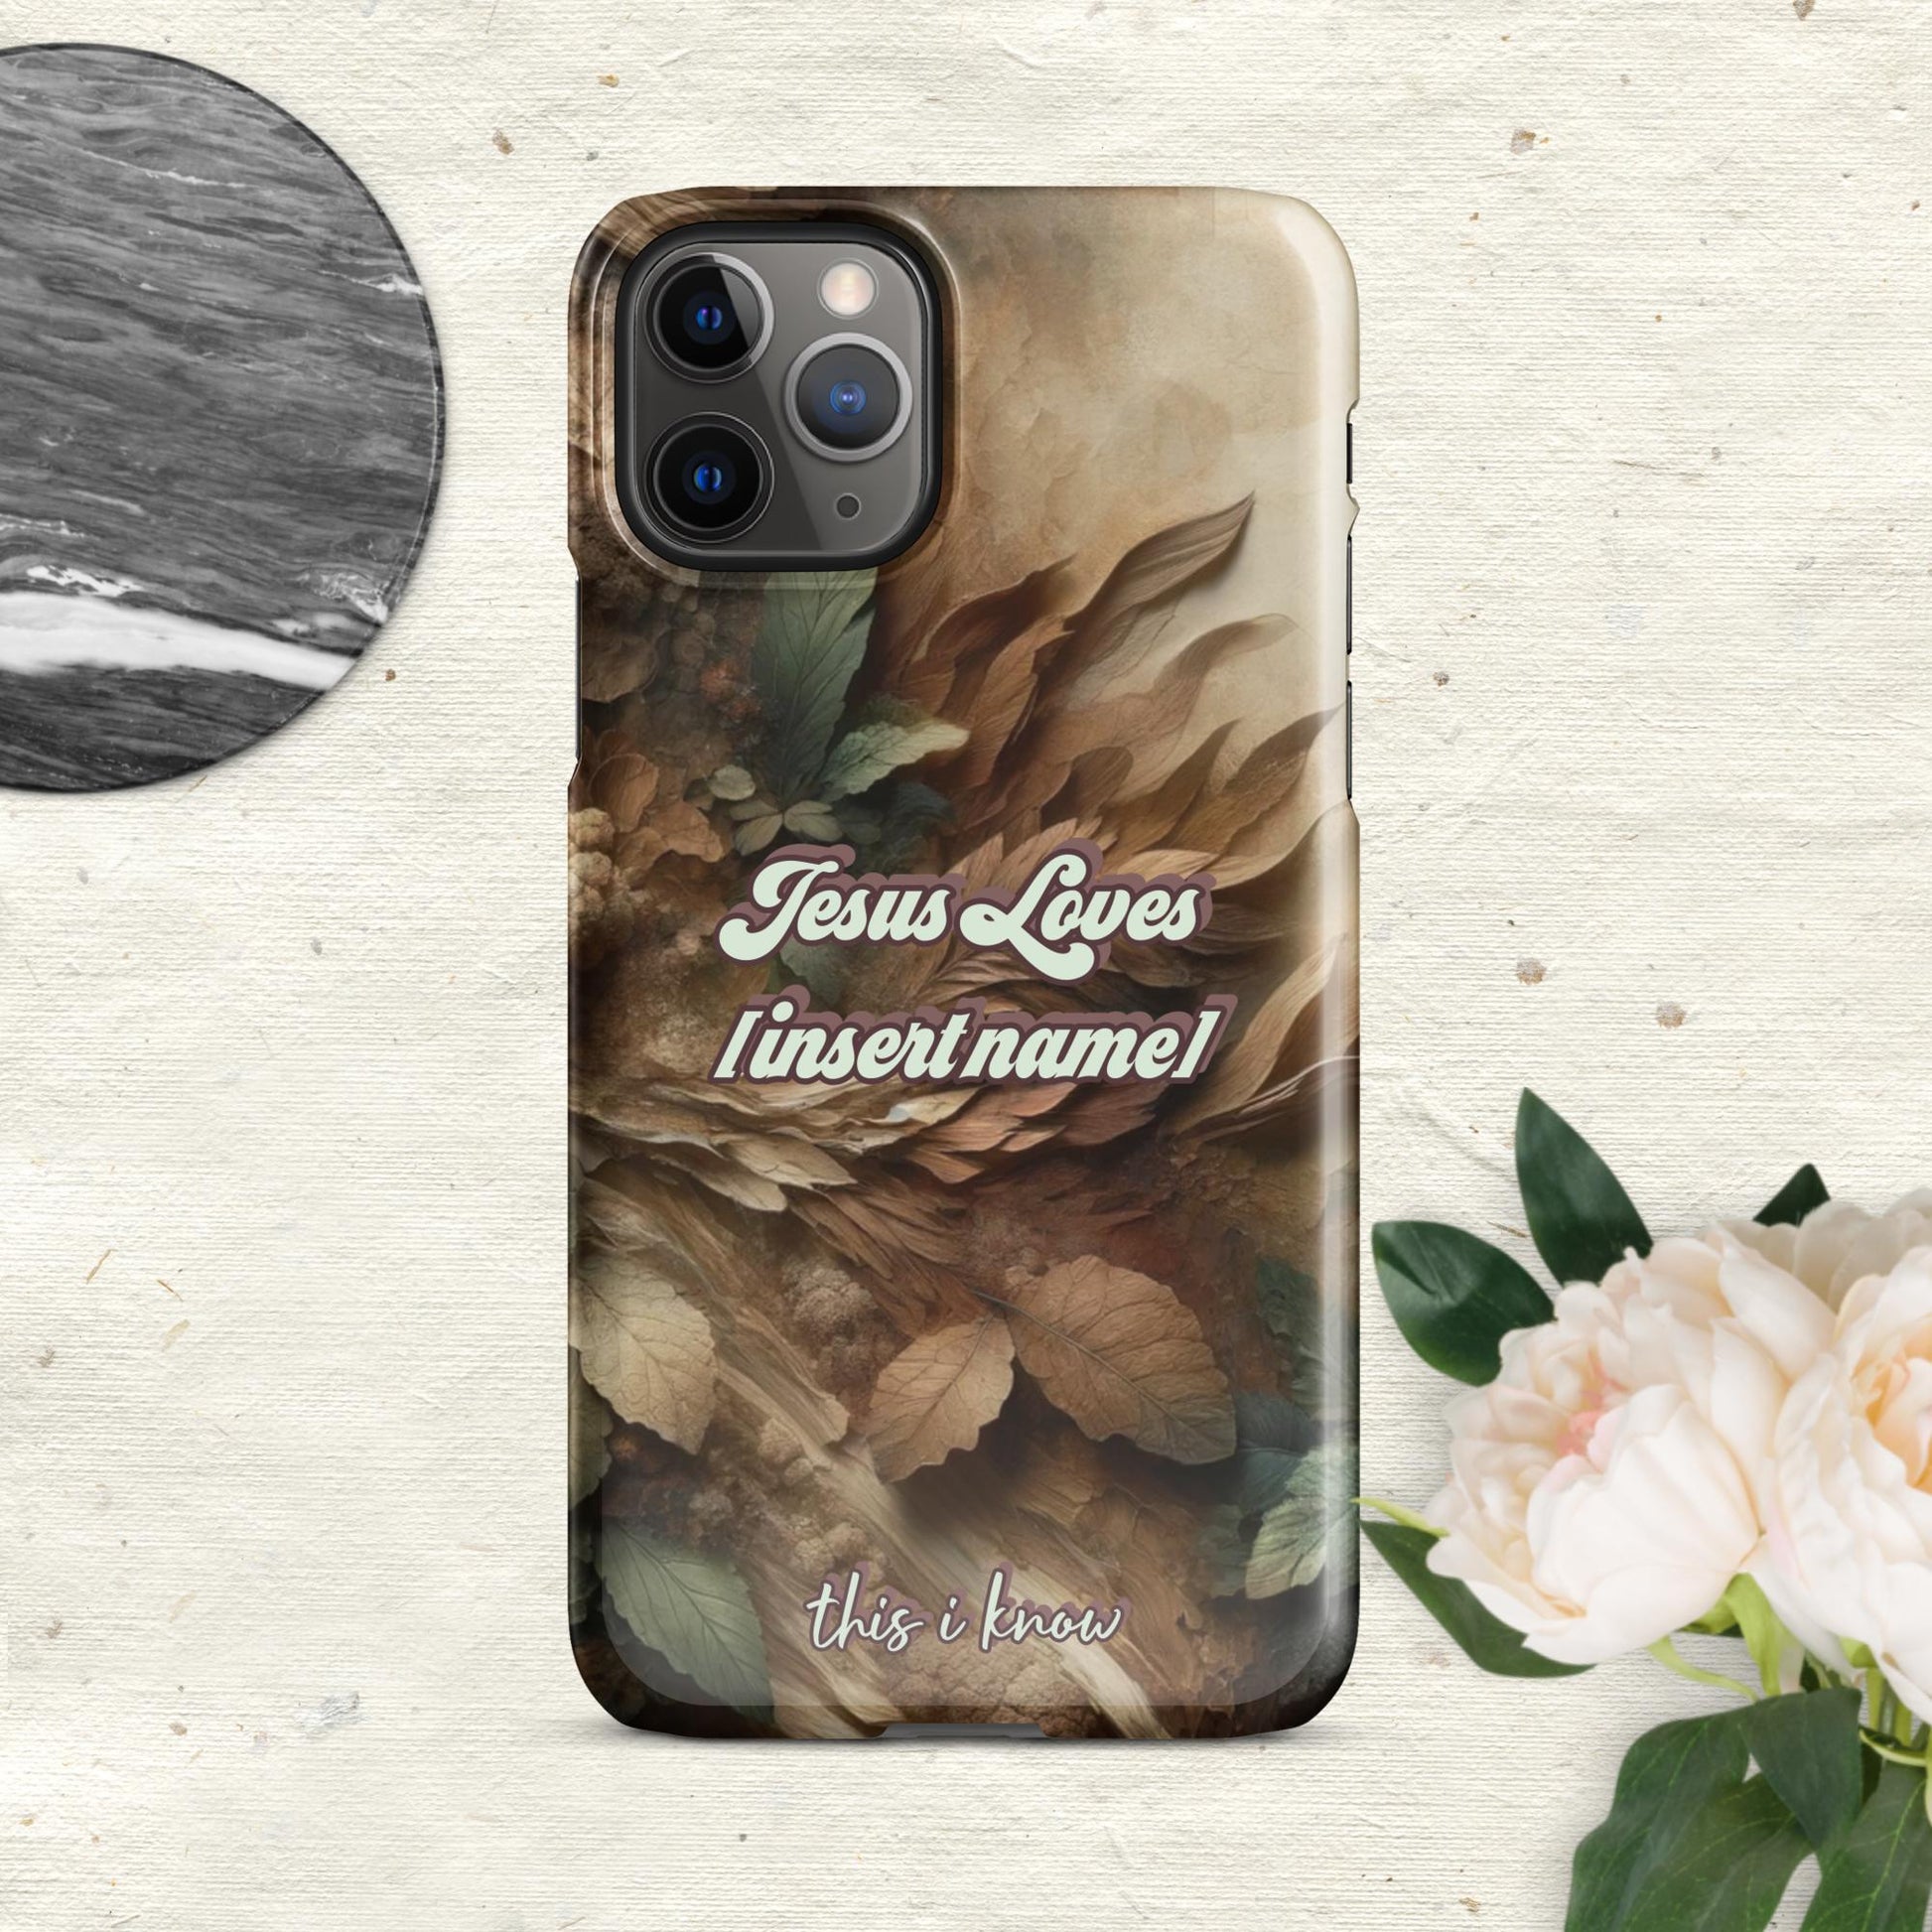 Trendyguard Glossy / iPhone 11 Pro Jesus Loves [insertname] This I Know | Custom Snap case for iPhone®